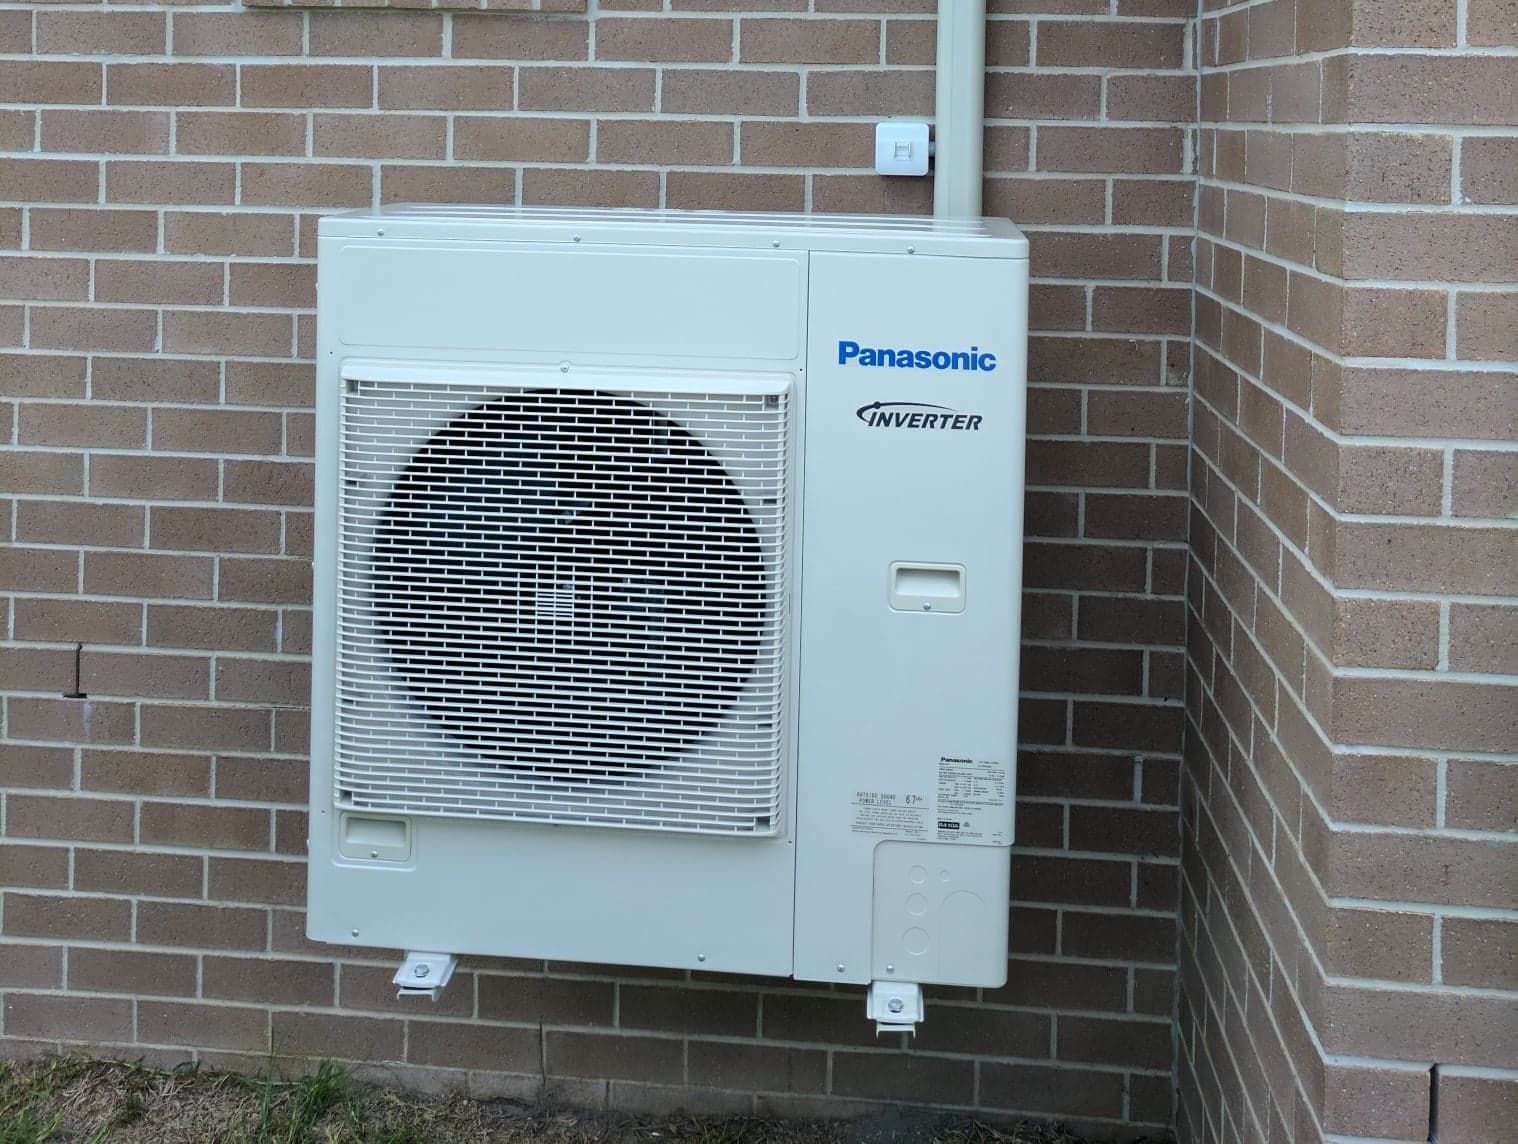 Panasonic Air Conditioner — Gleeson’s Refrigeration & Air Conditioning in Port Macquarie NSW